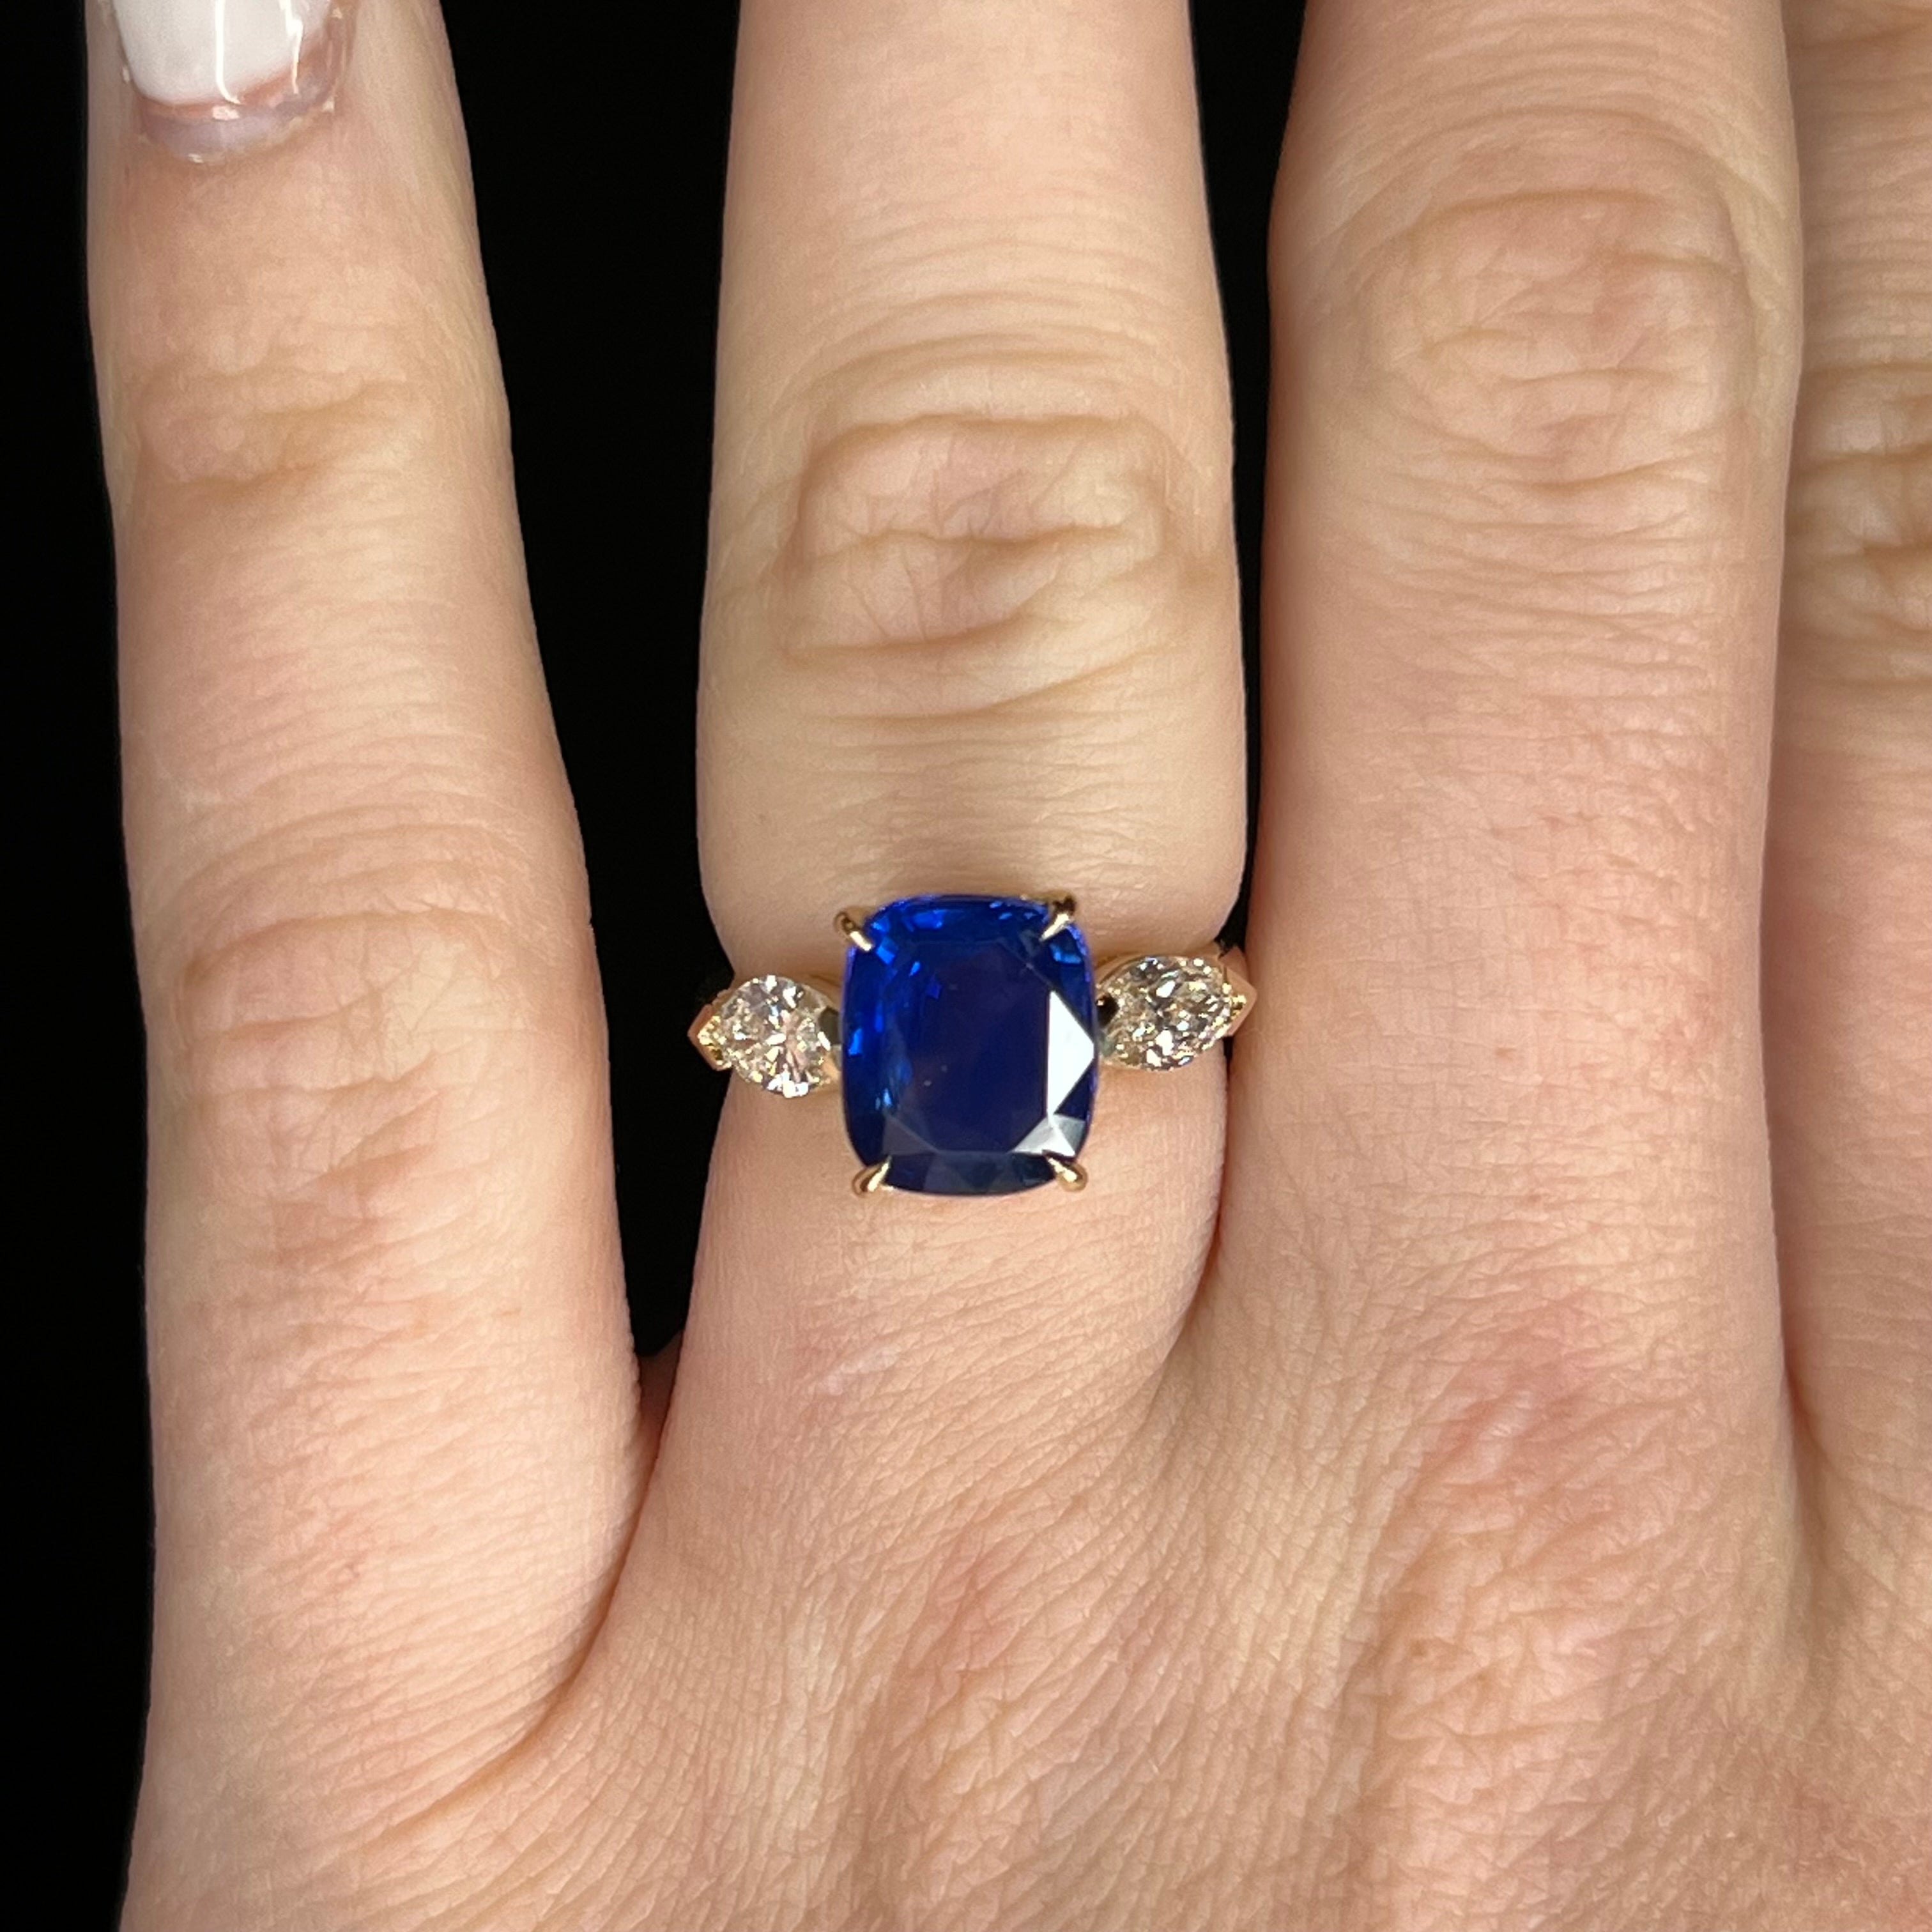 Dazzling 1 Carat Blue Sapphire Ring: Sparkle with Elegance